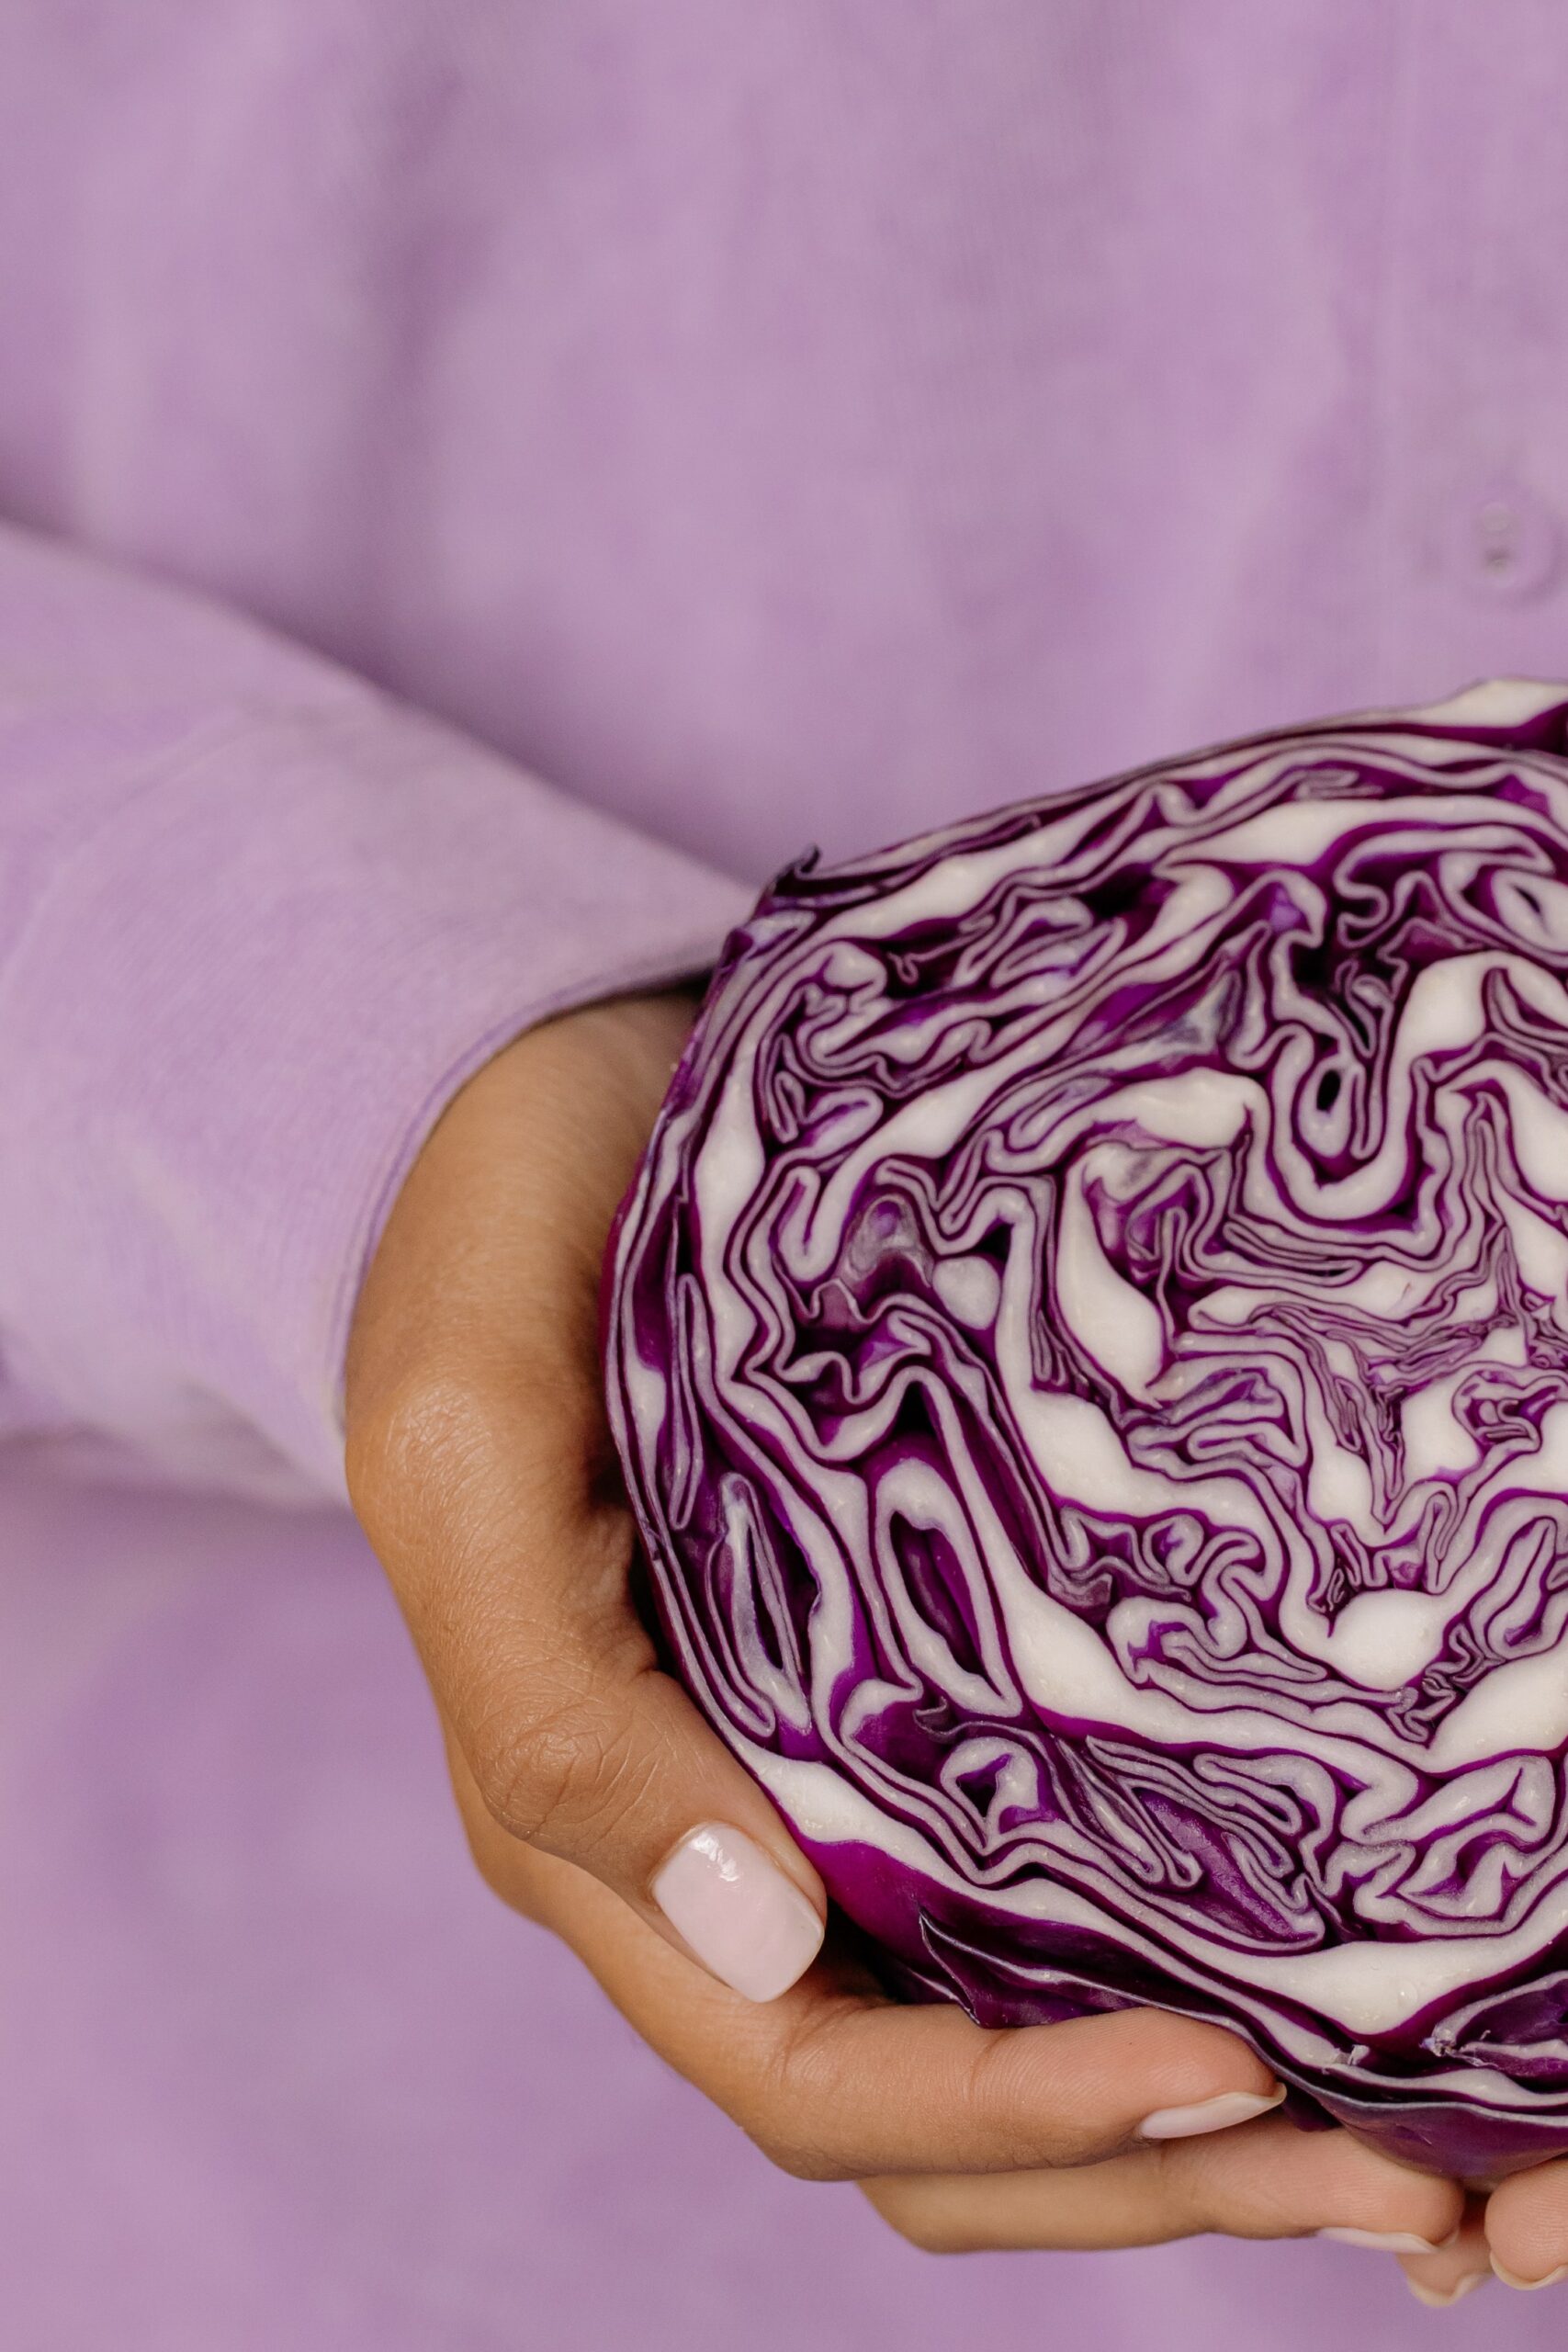 Comparing the Nutrition of Raw Vs Fermented Cabbage